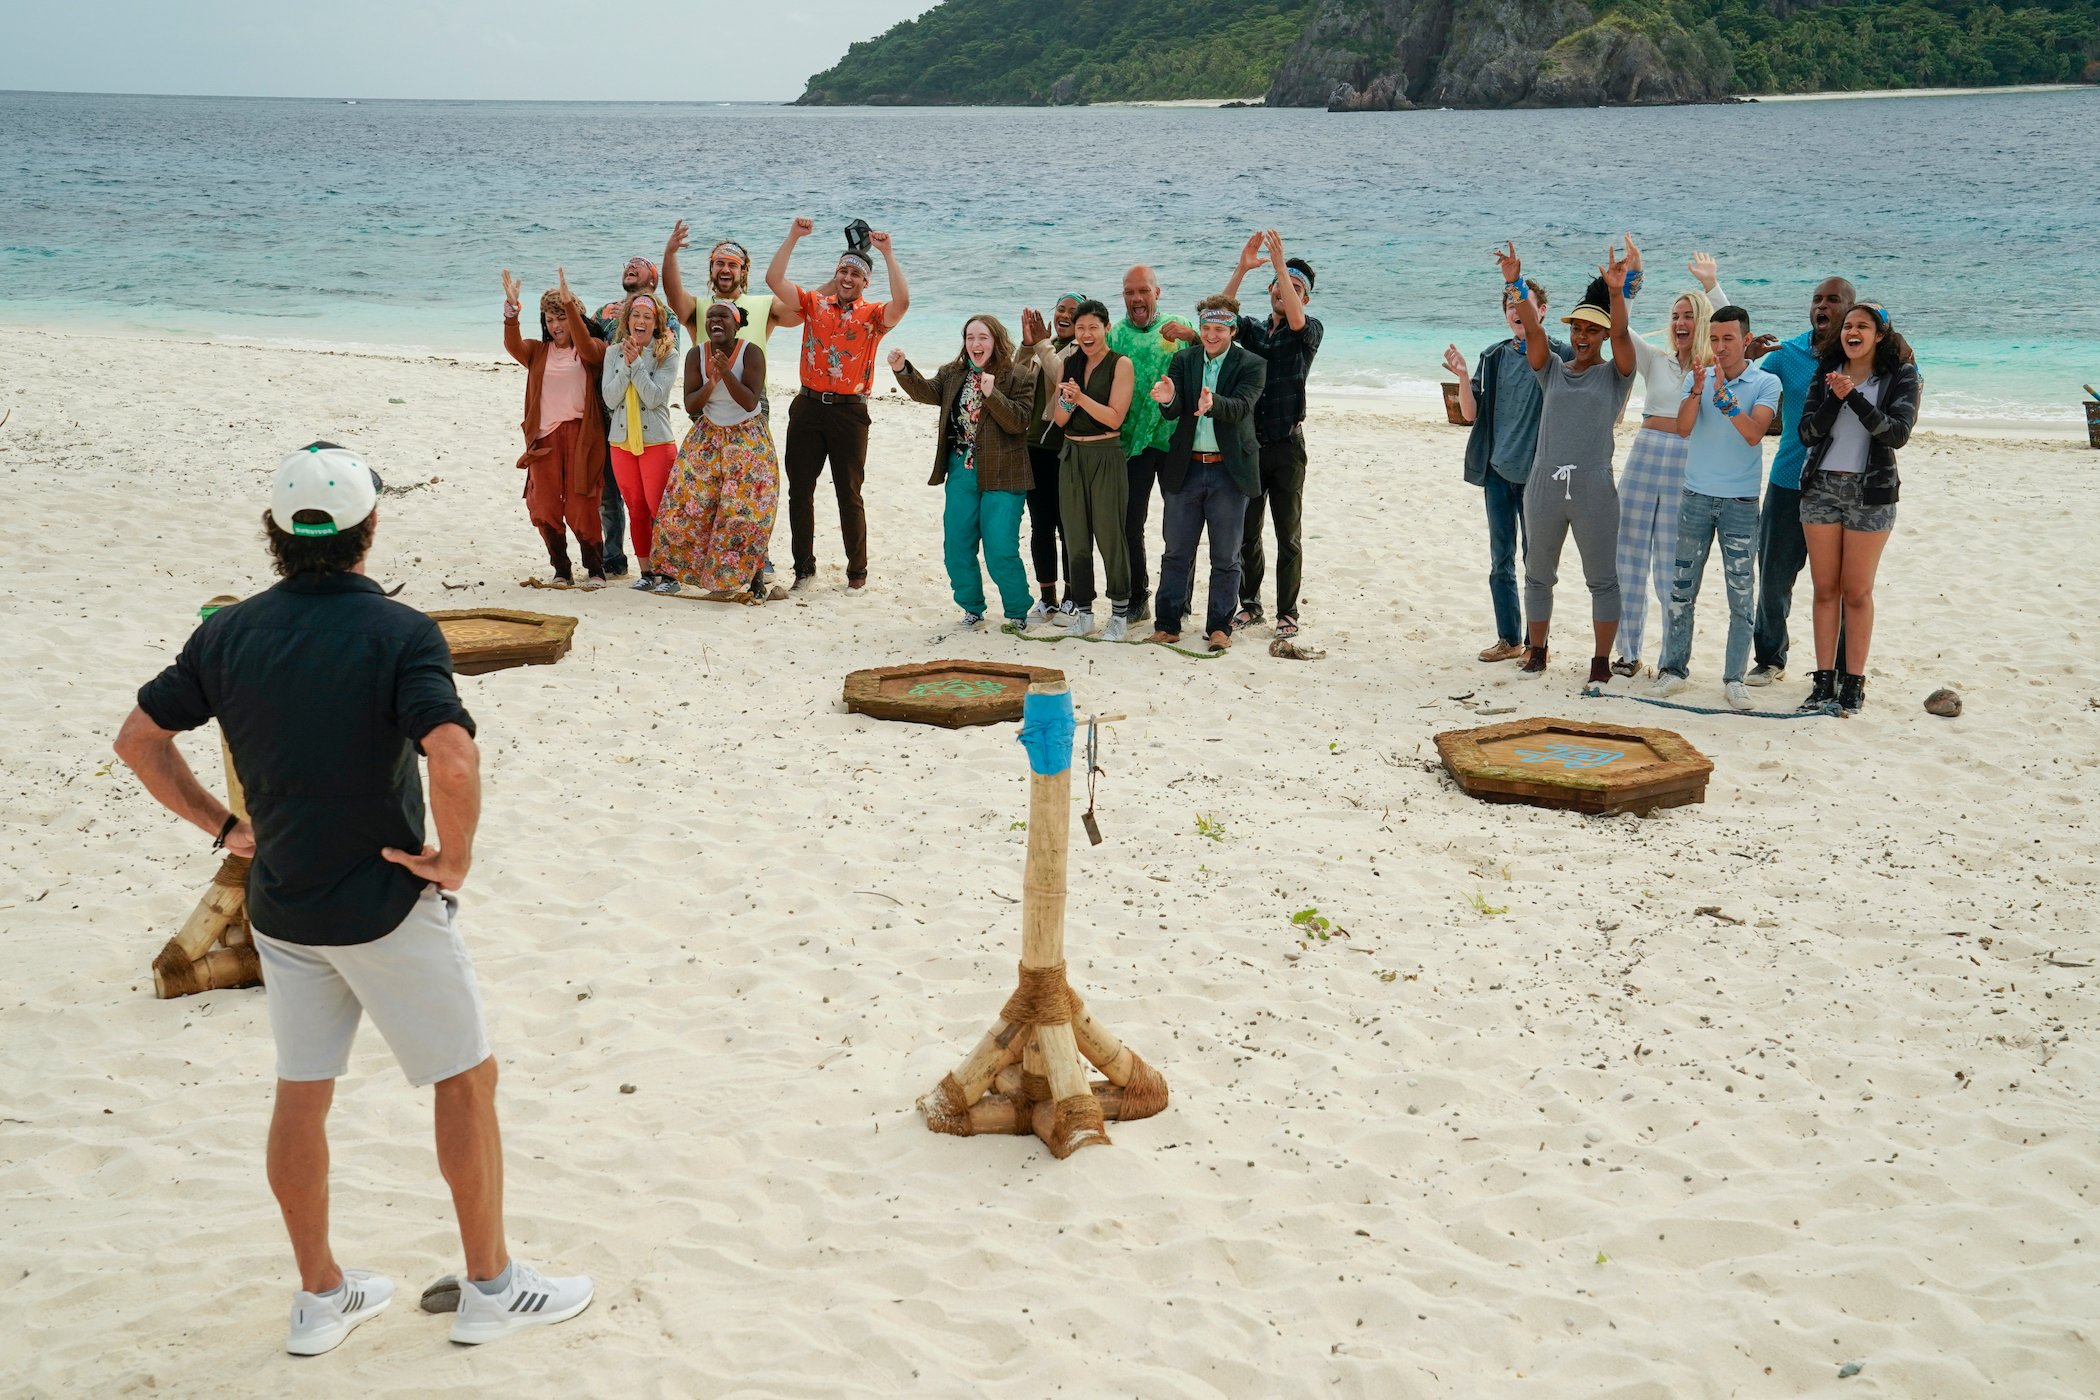 What time does 'Survivor' start? How to watch season premiere tonight